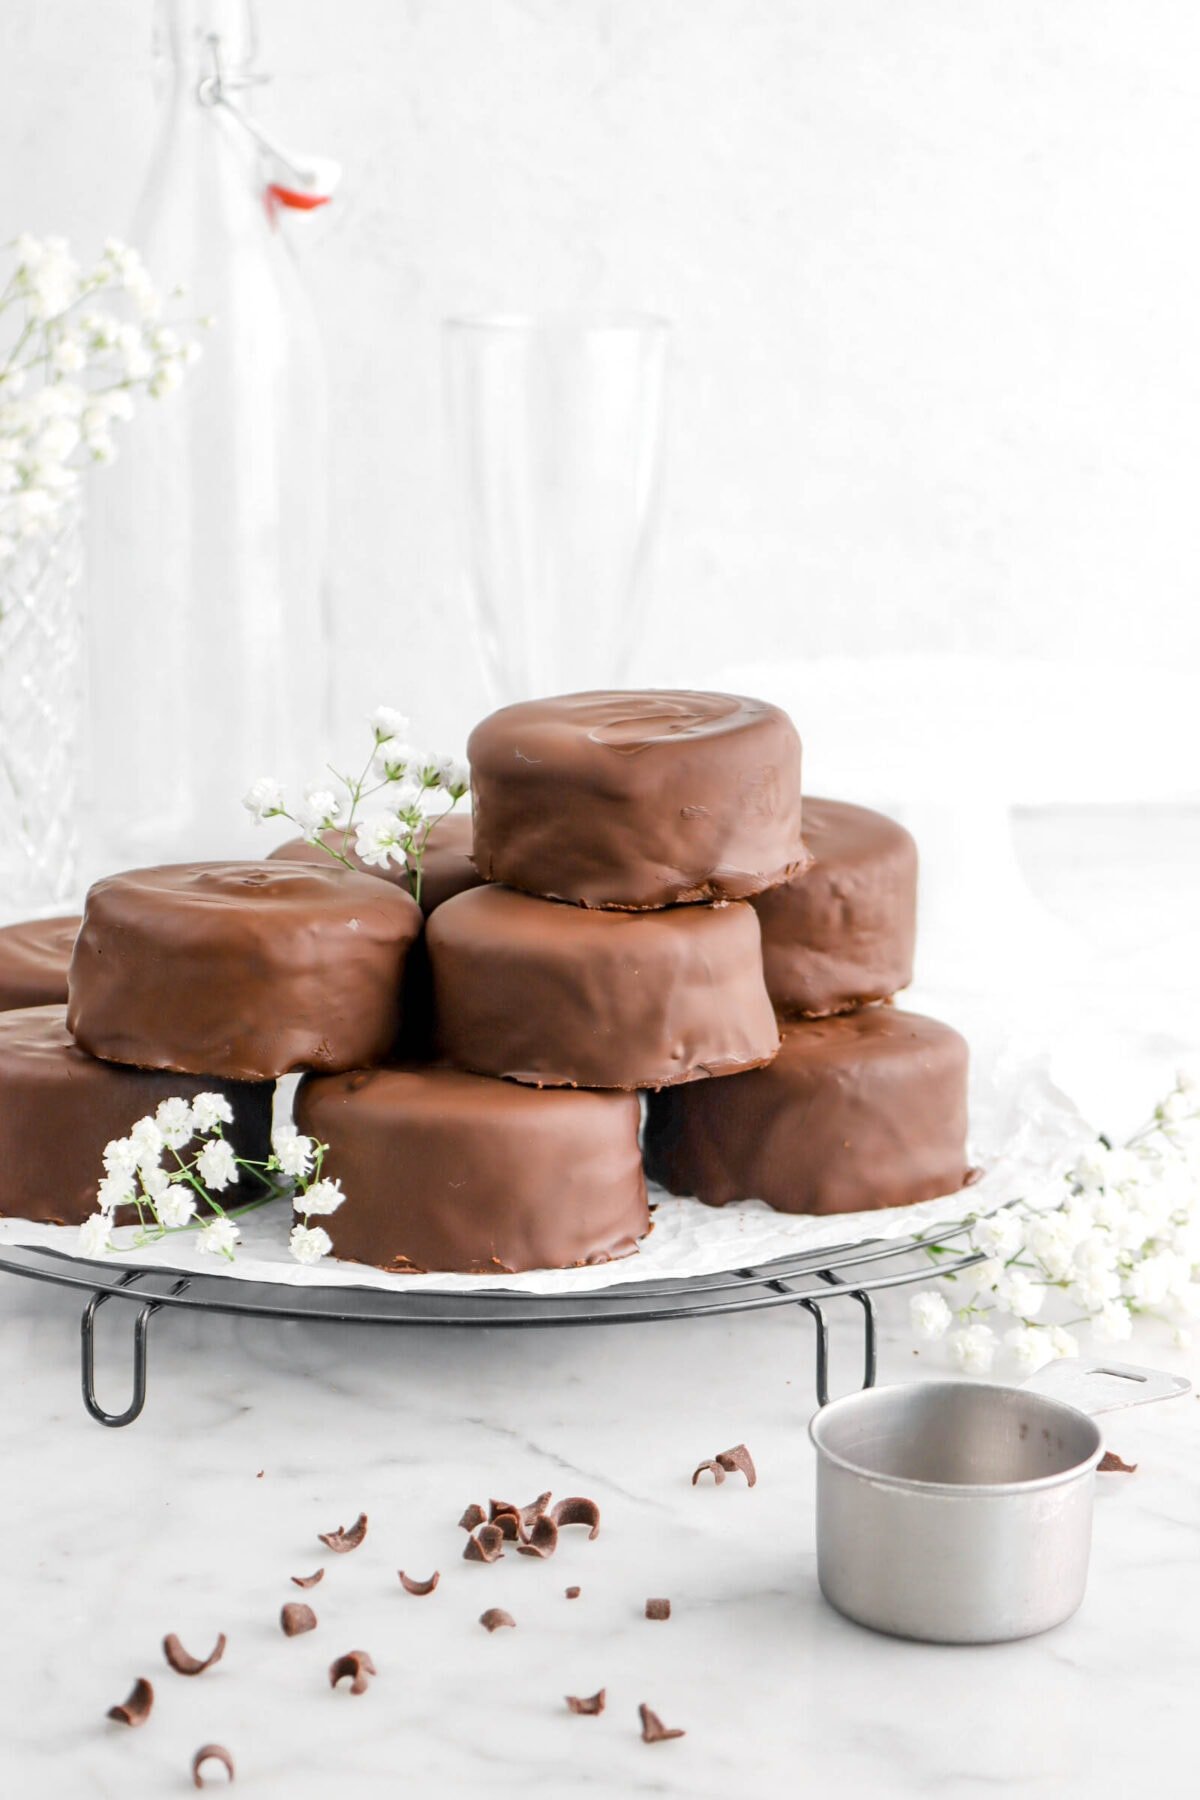 stacked chocolate coated cakes on wire cooling rack with flowers